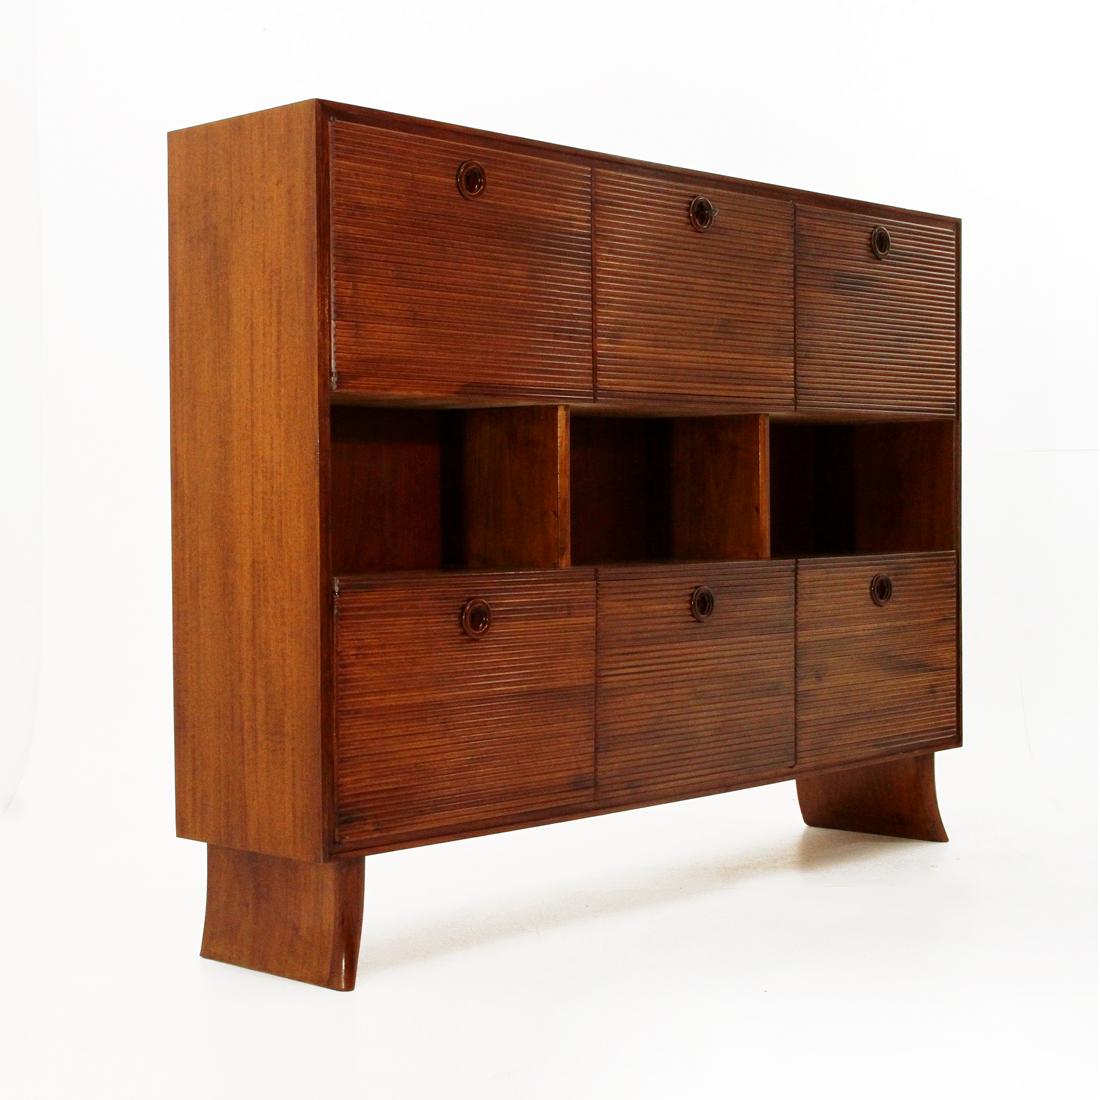 Cabinet designed in the 1930s by Paolo Buffa and executed by Galdino Maspero.
Structure in veneered wood.
3 central open compartments.
6 compartments with front door covered in grissinato wood.
Turned wooden handles with pass-through